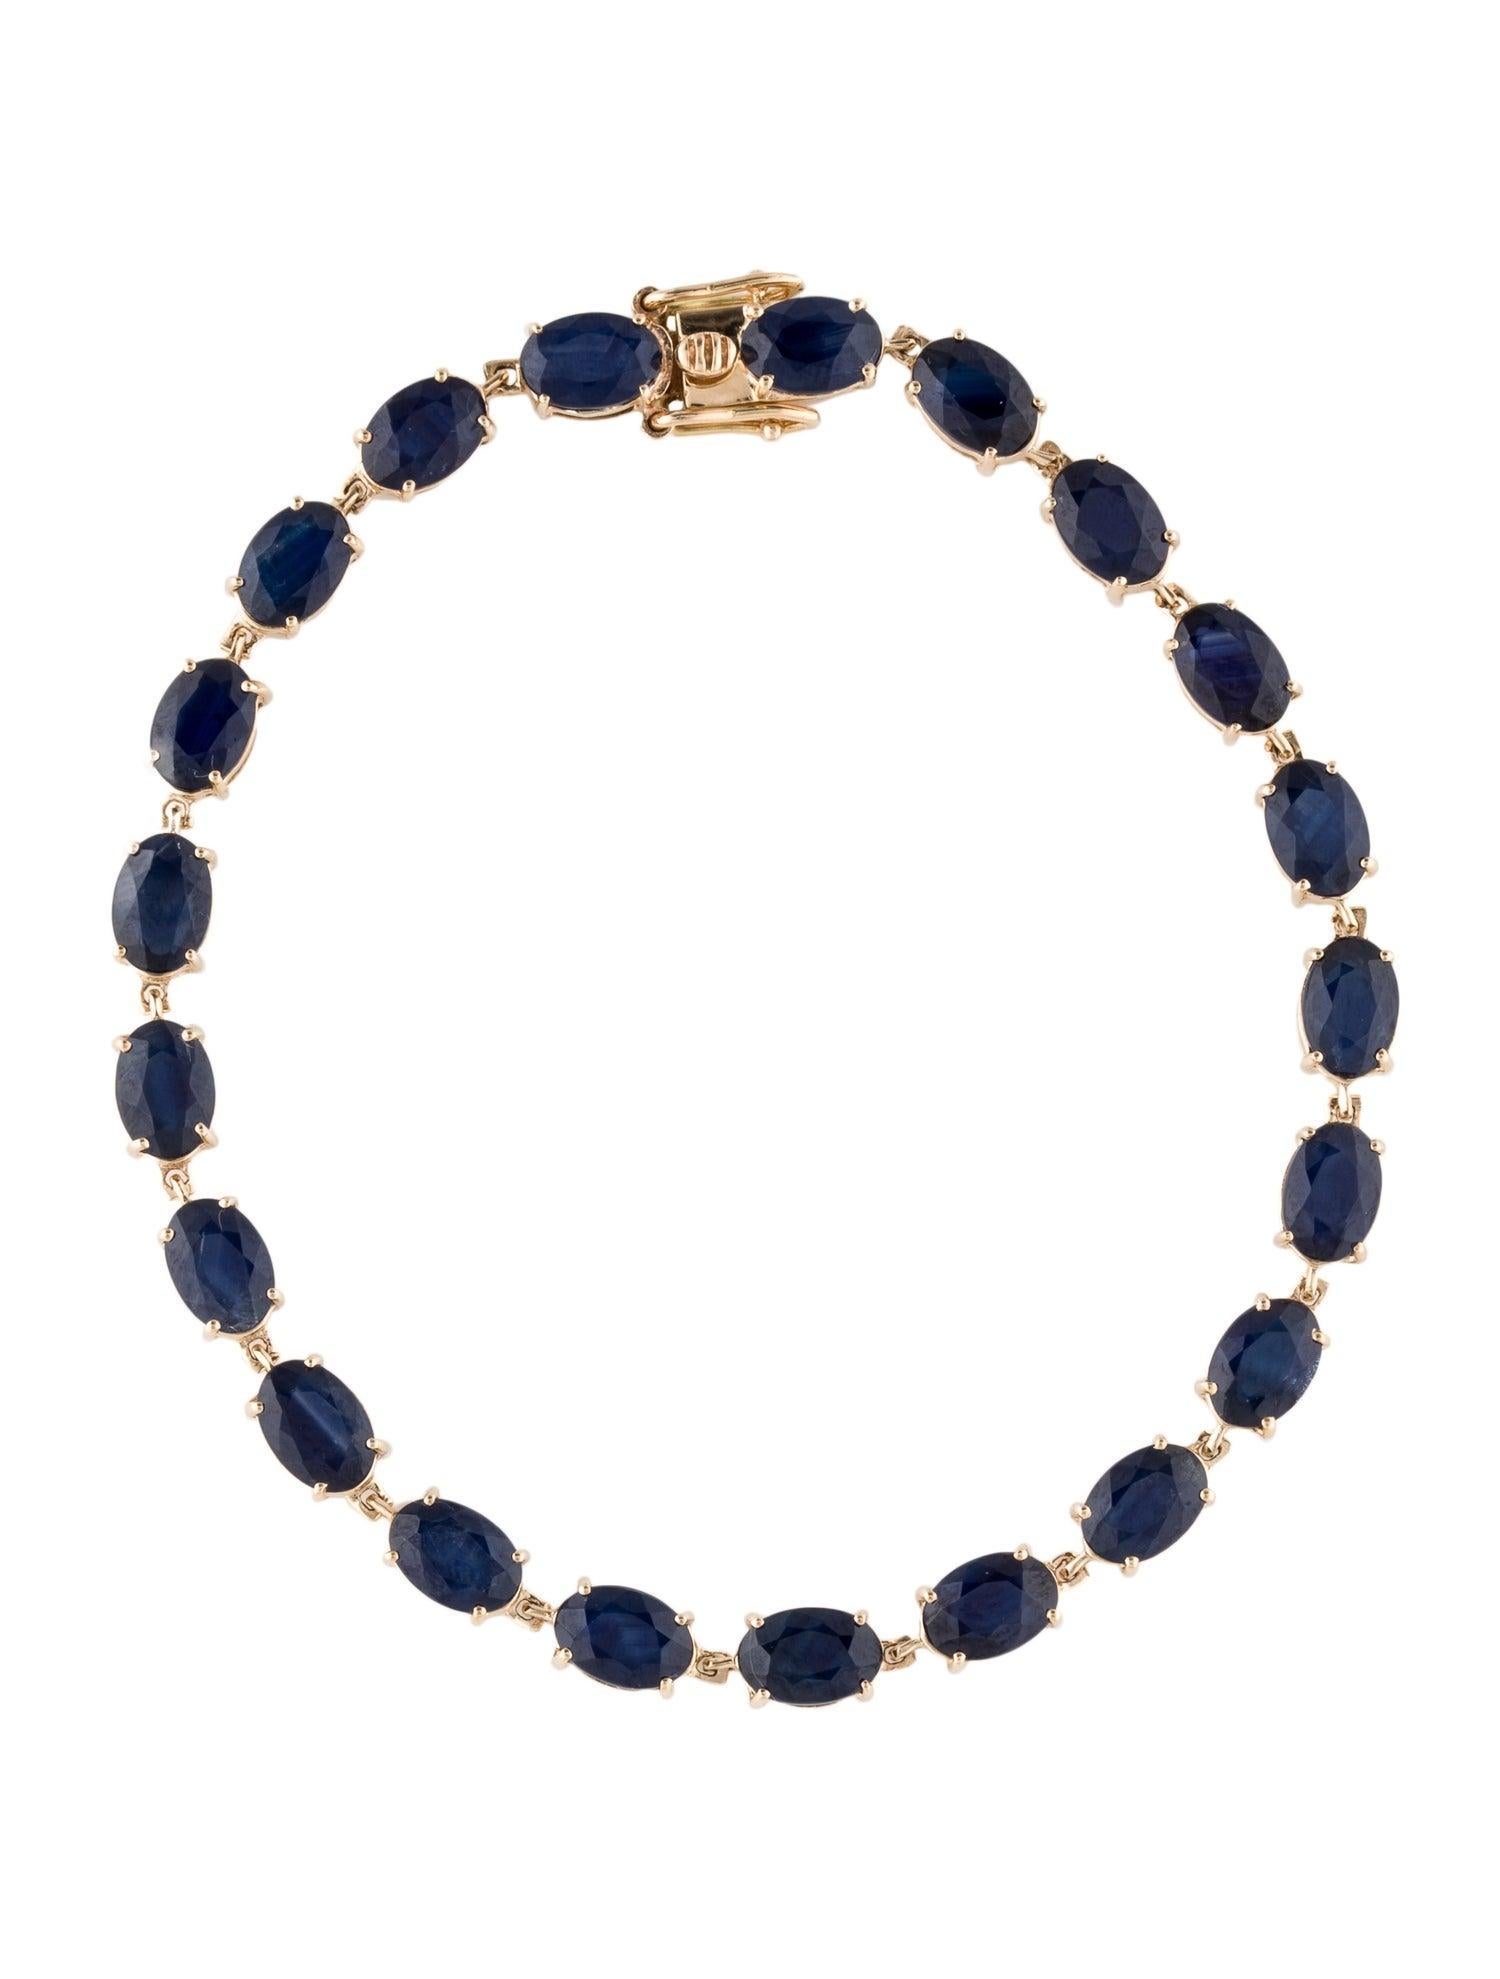 14K 14.70ctw Sapphire Link Bracelet - Timeless Elegance, Exquisite Design In New Condition For Sale In Holtsville, NY